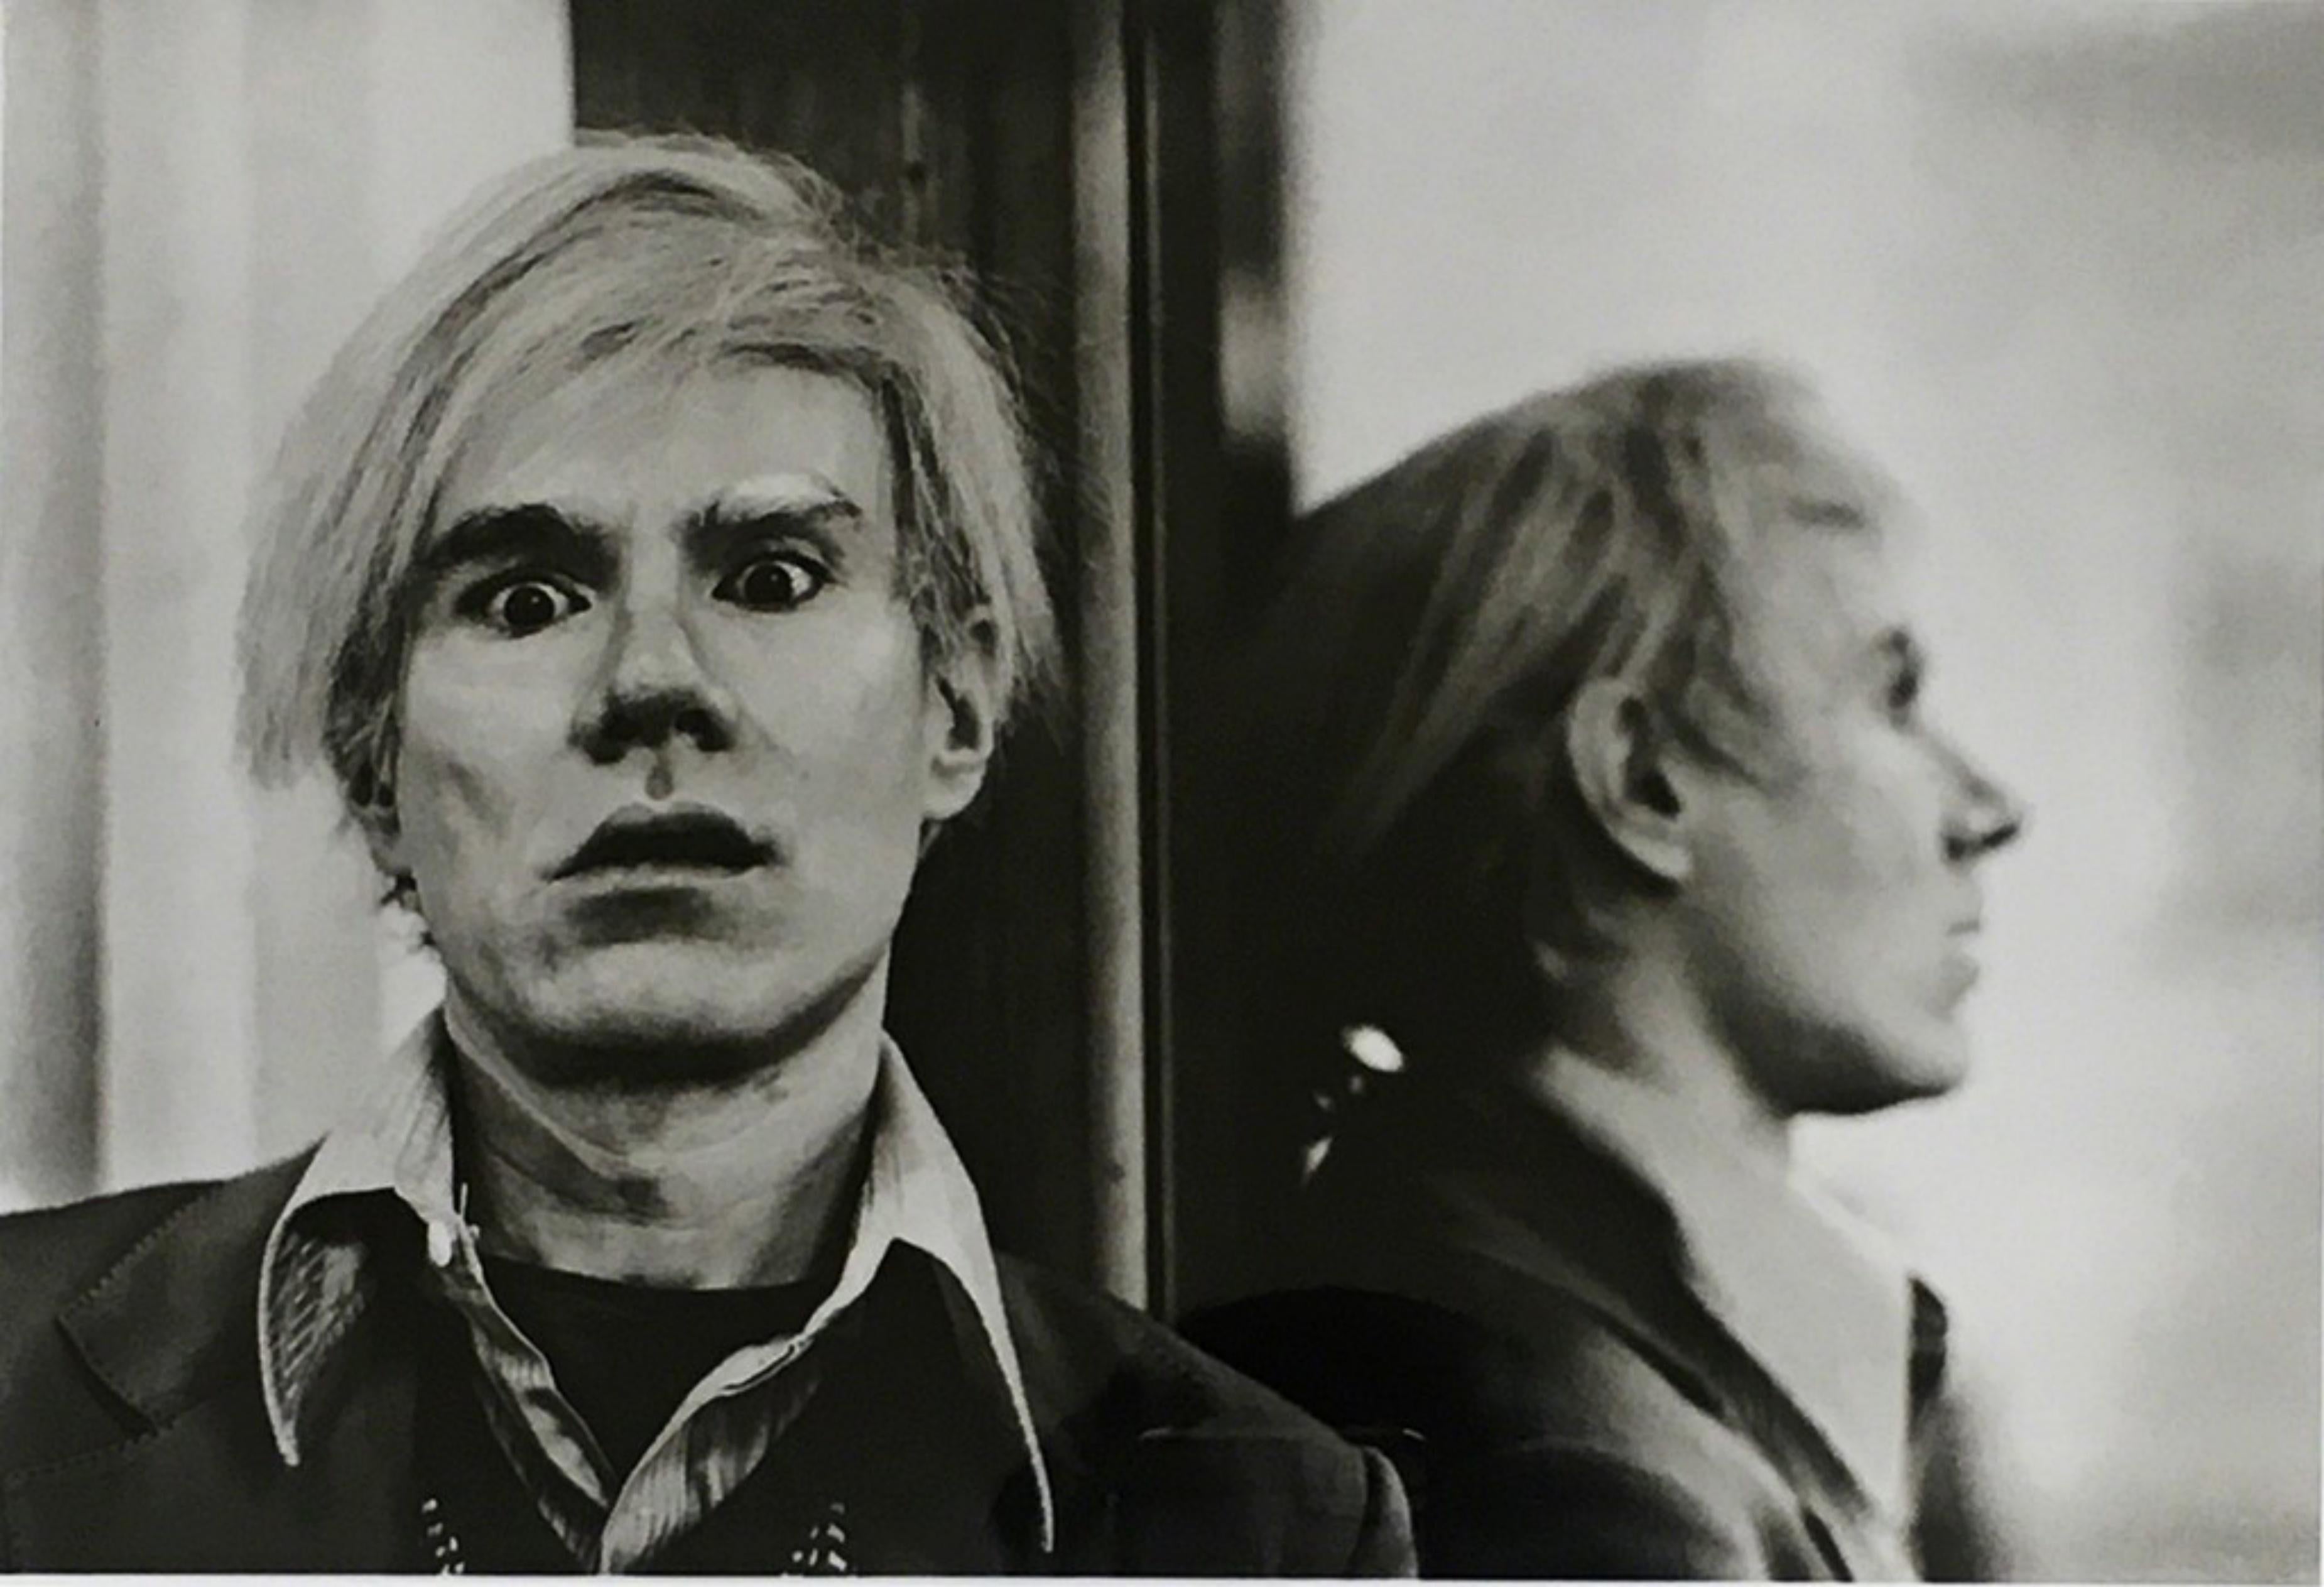 Andy Warhol in his New York studio, 1976 (Palm Springs Art Museum), Signed  - Print by Michael Childers